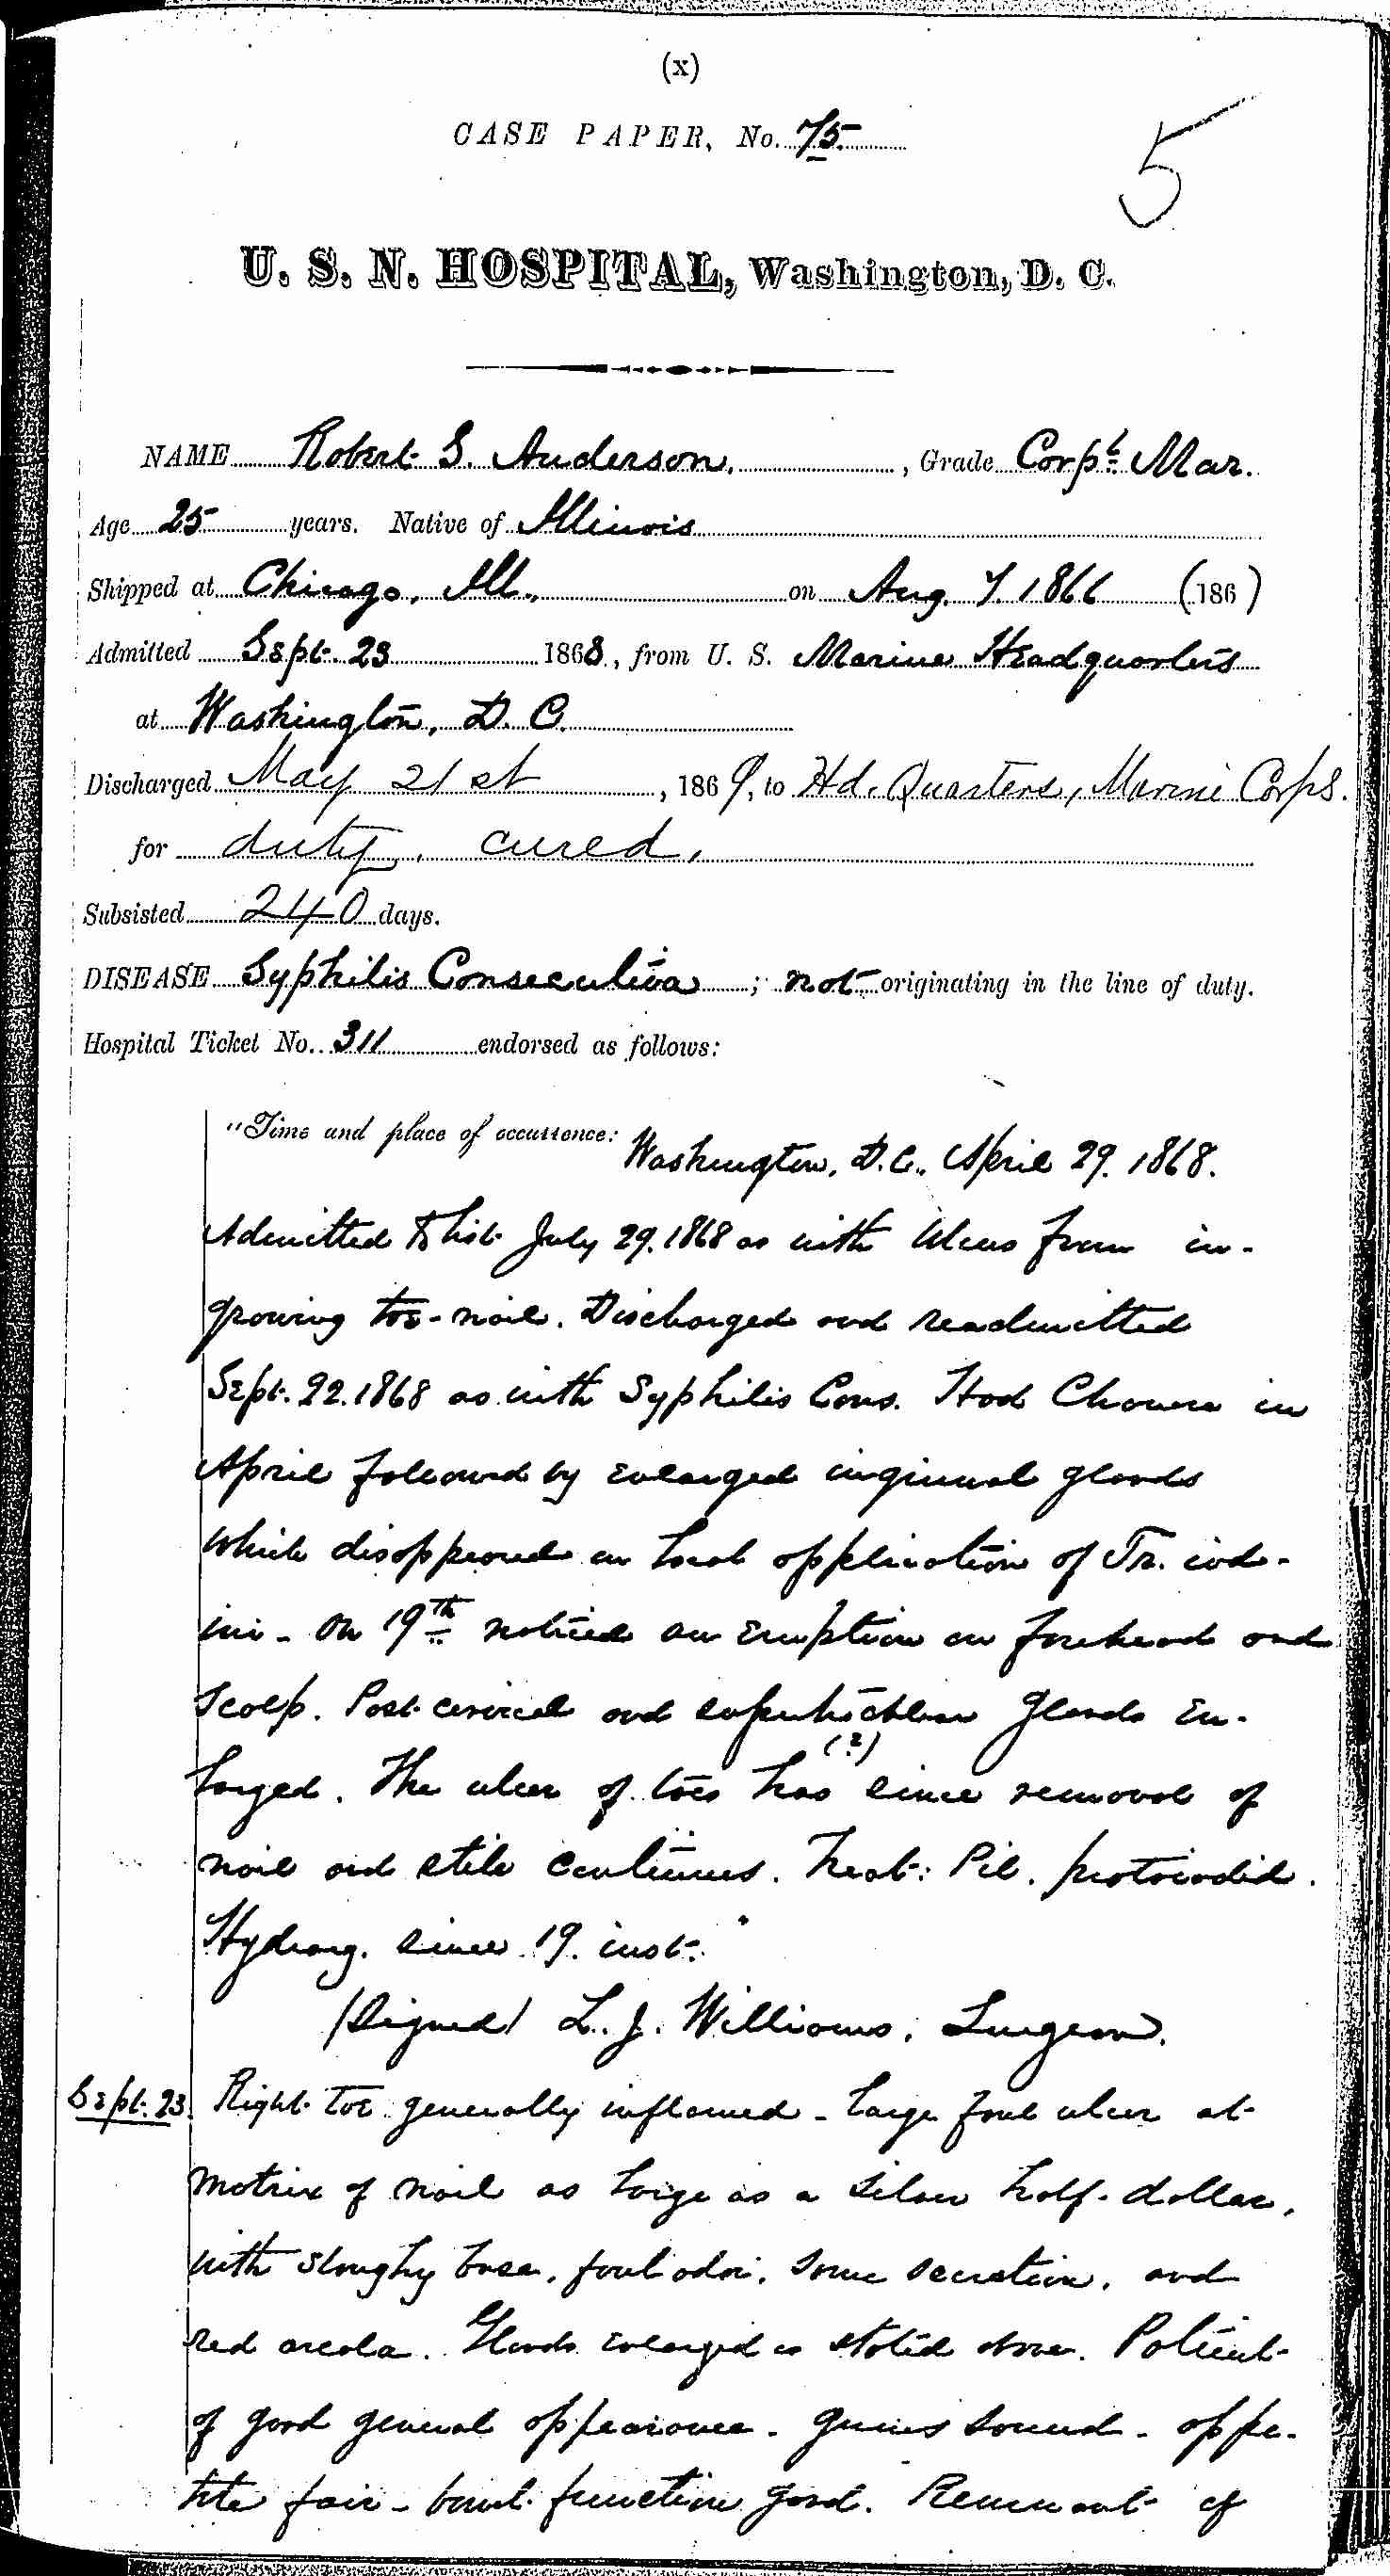 Entry for Robert S. Anderson (page 1 of 15) in the log Hospital Tickets and Case Papers - Naval Hospital - Washington, D.C. - 1868-69